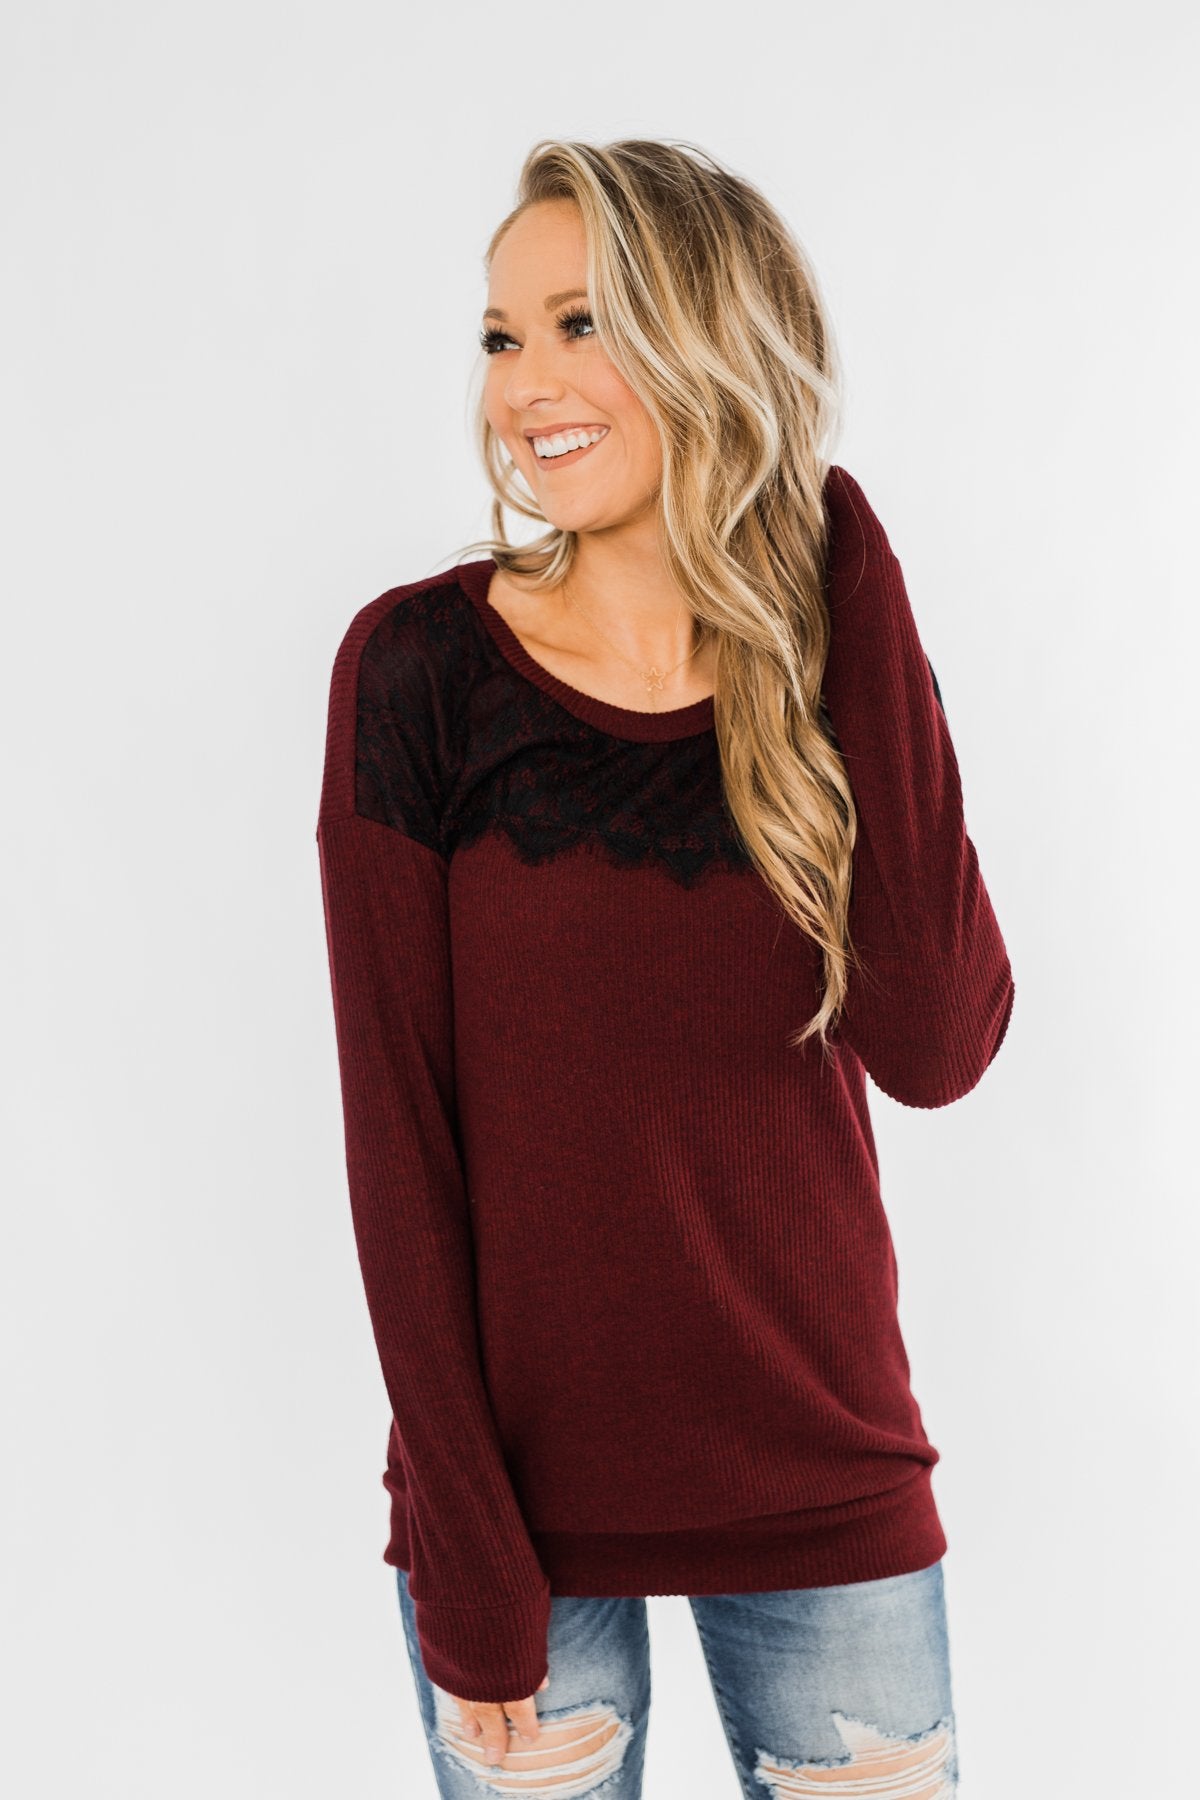 Show Stopper Black Lace Top- Burgundy